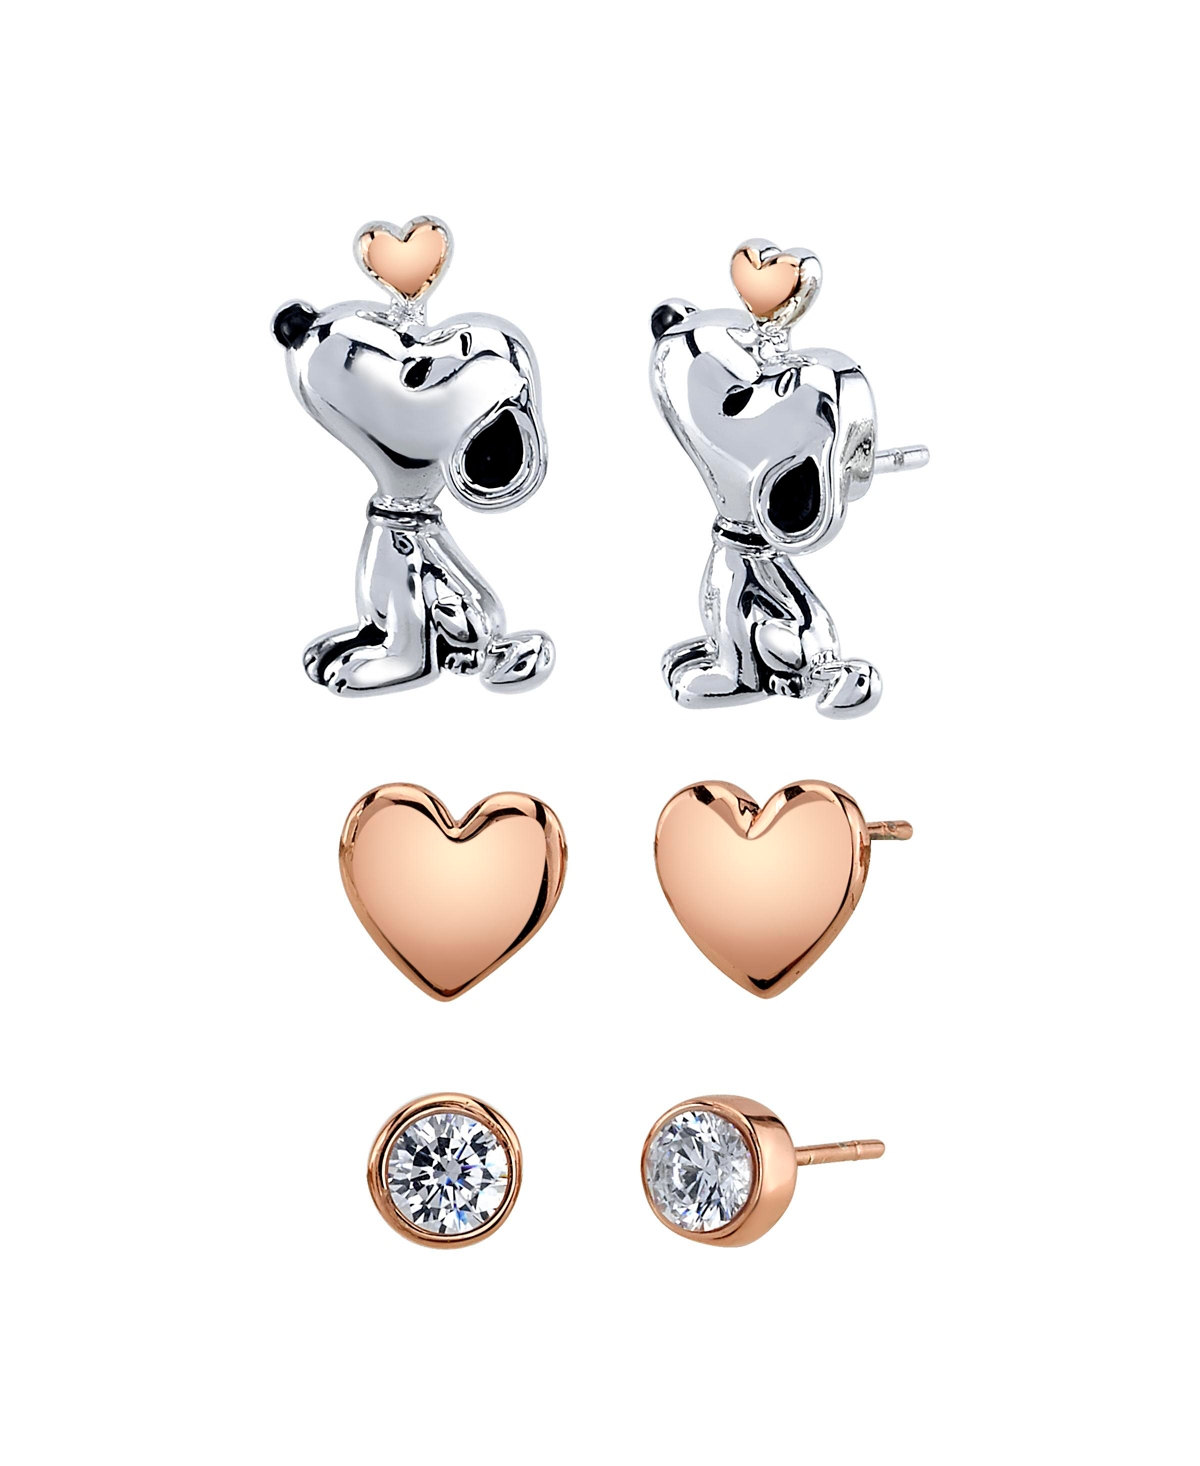 Unwritten Three Pair Silver Plated Snoopy Earring Set with Rose Gold Heart and Cz Bezel Stud - Two-Tone